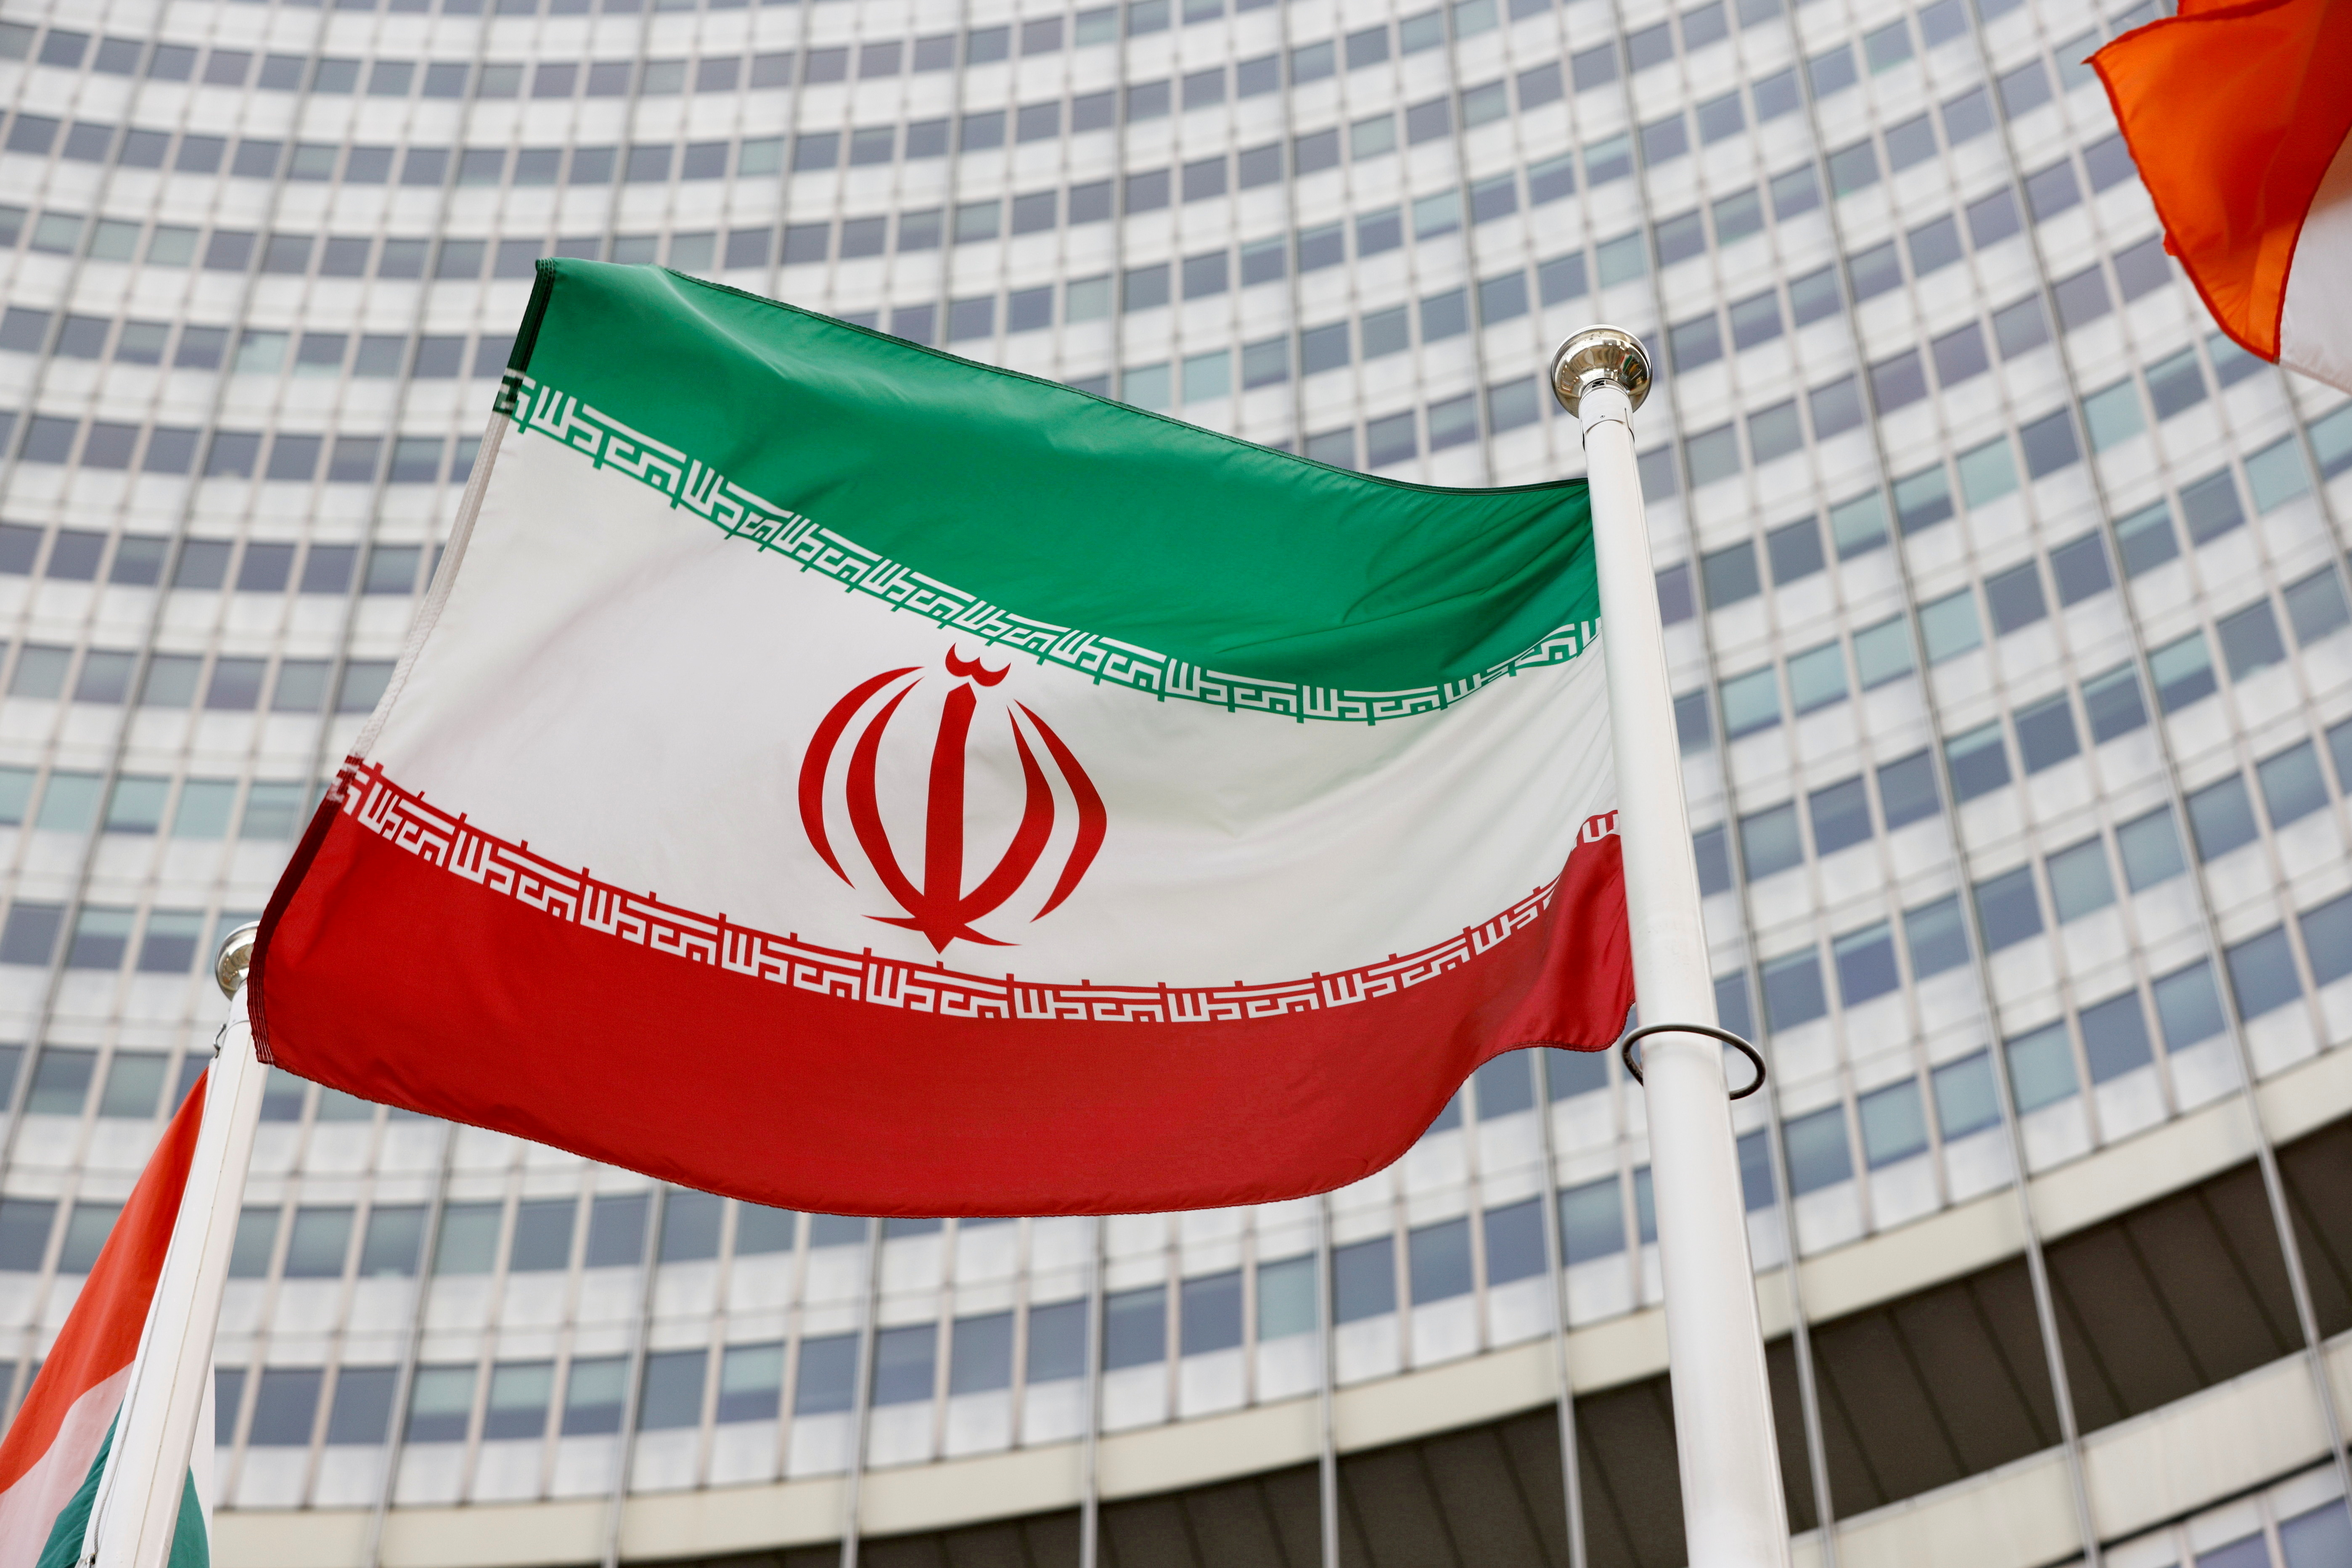 The Iranian flag waves in front of the International Atomic Energy Agency (IAEA) headquarters in Vienna, Austria May 23, 2021. REUTERS/Leonhard Foeger